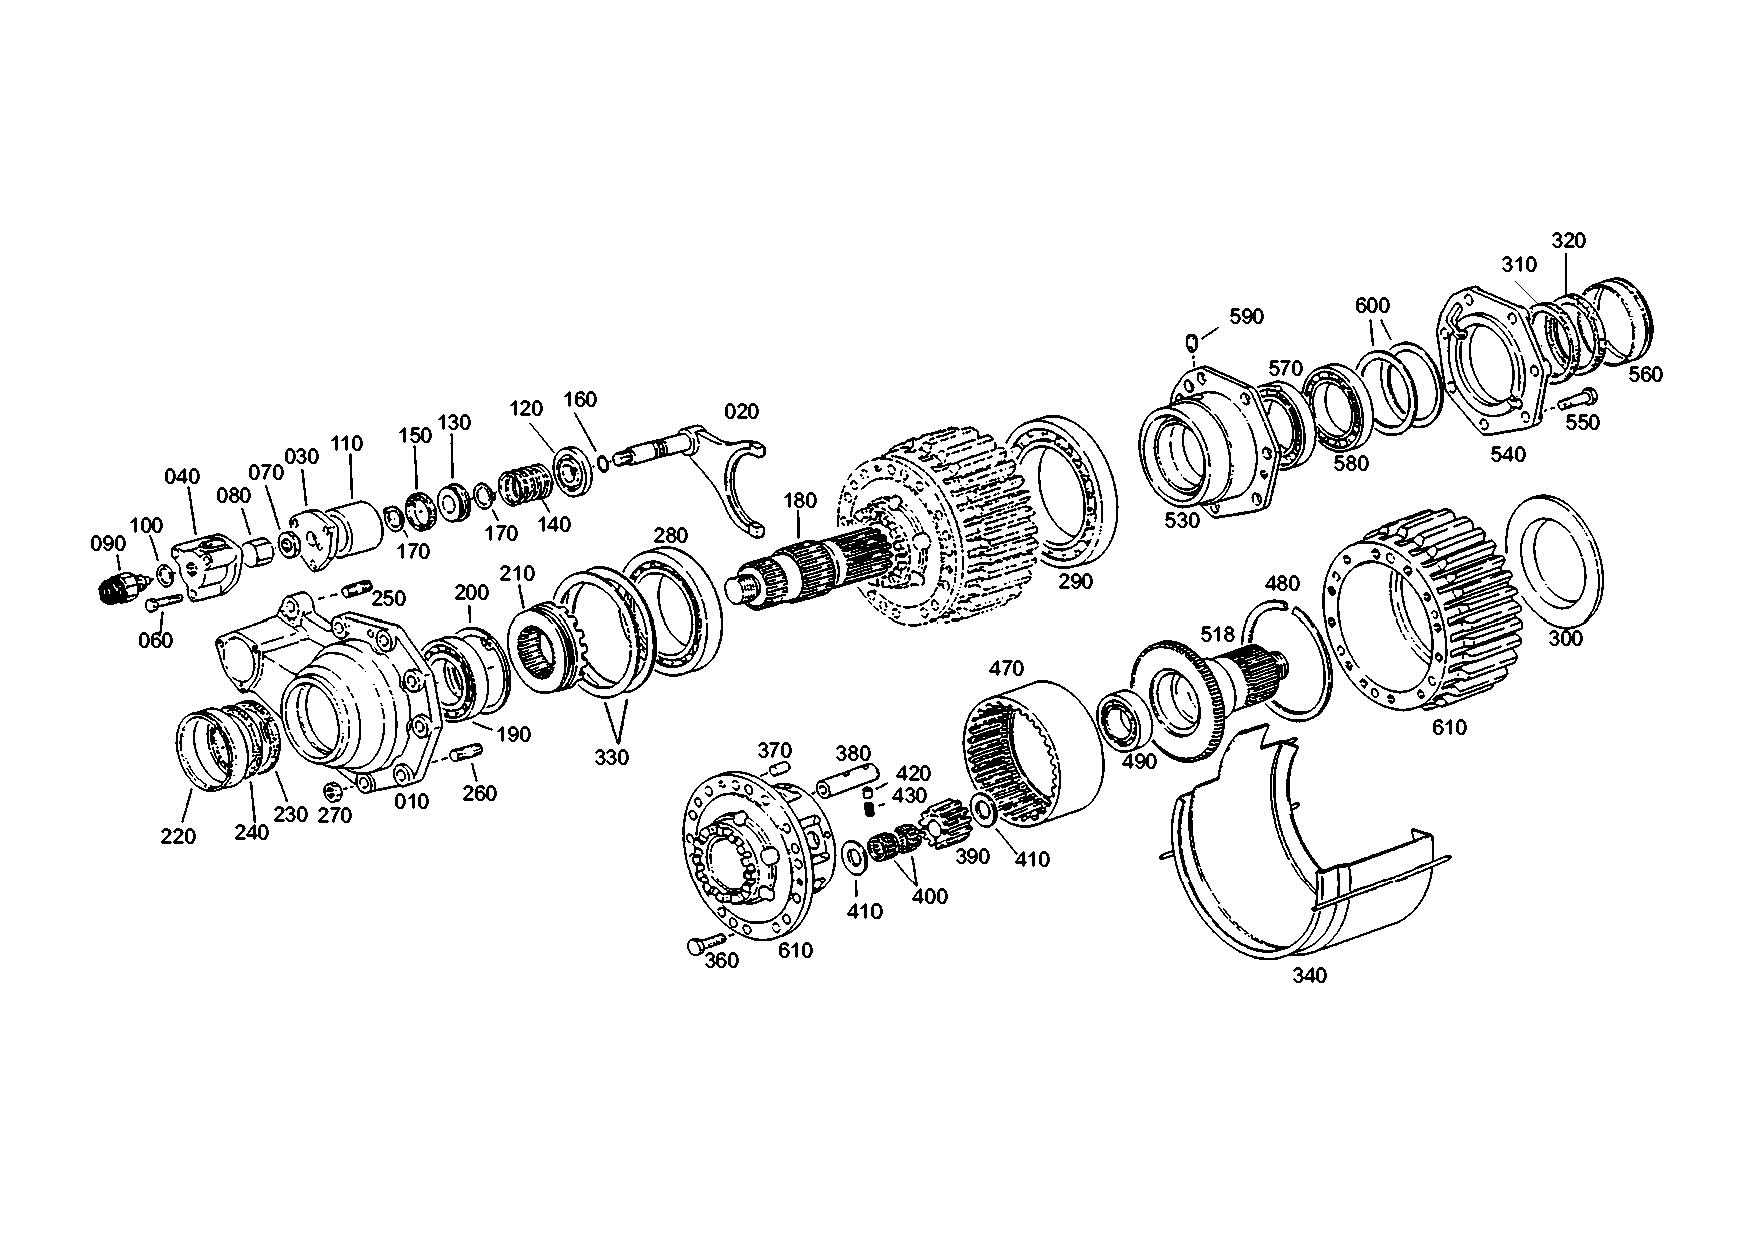 drawing for TITAN GMBH 199118250369 - ADJUSTMENT PLATE (figure 4)